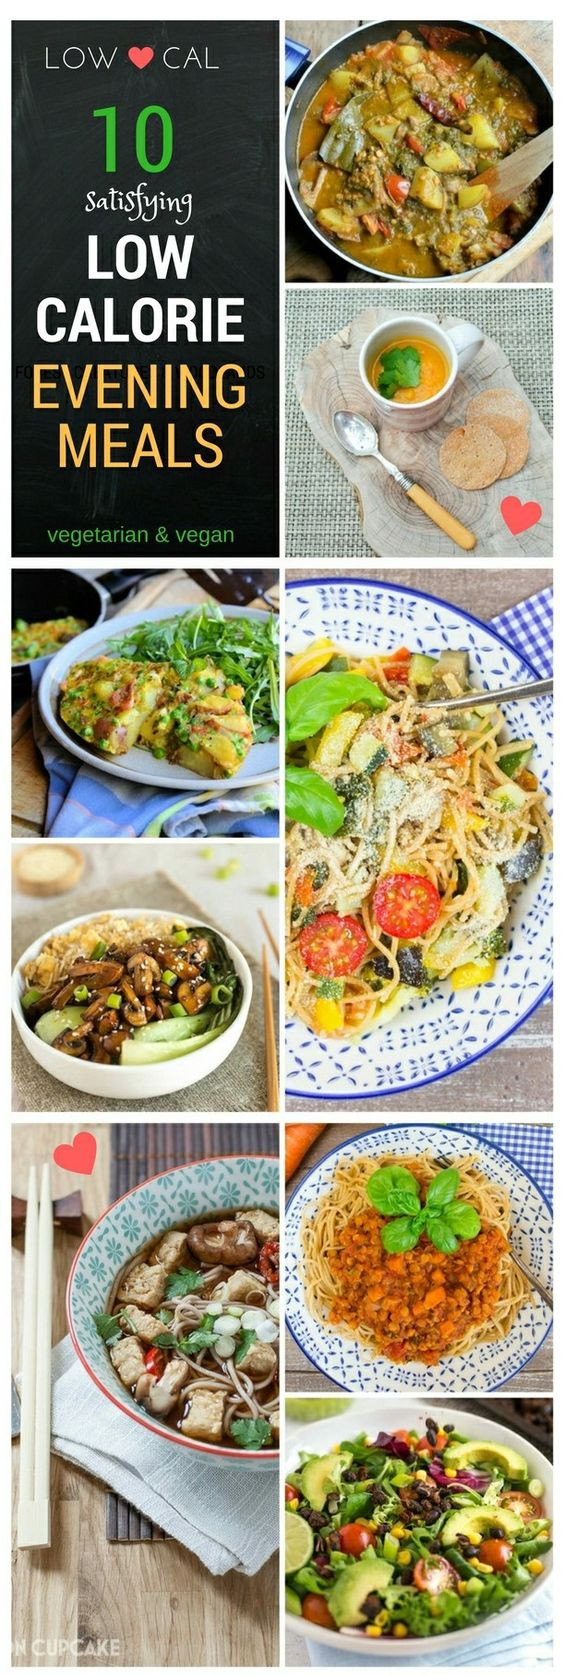 Low Calorie Vegan Recipes
 Low calorie meals Meals and Ve arian meal on Pinterest